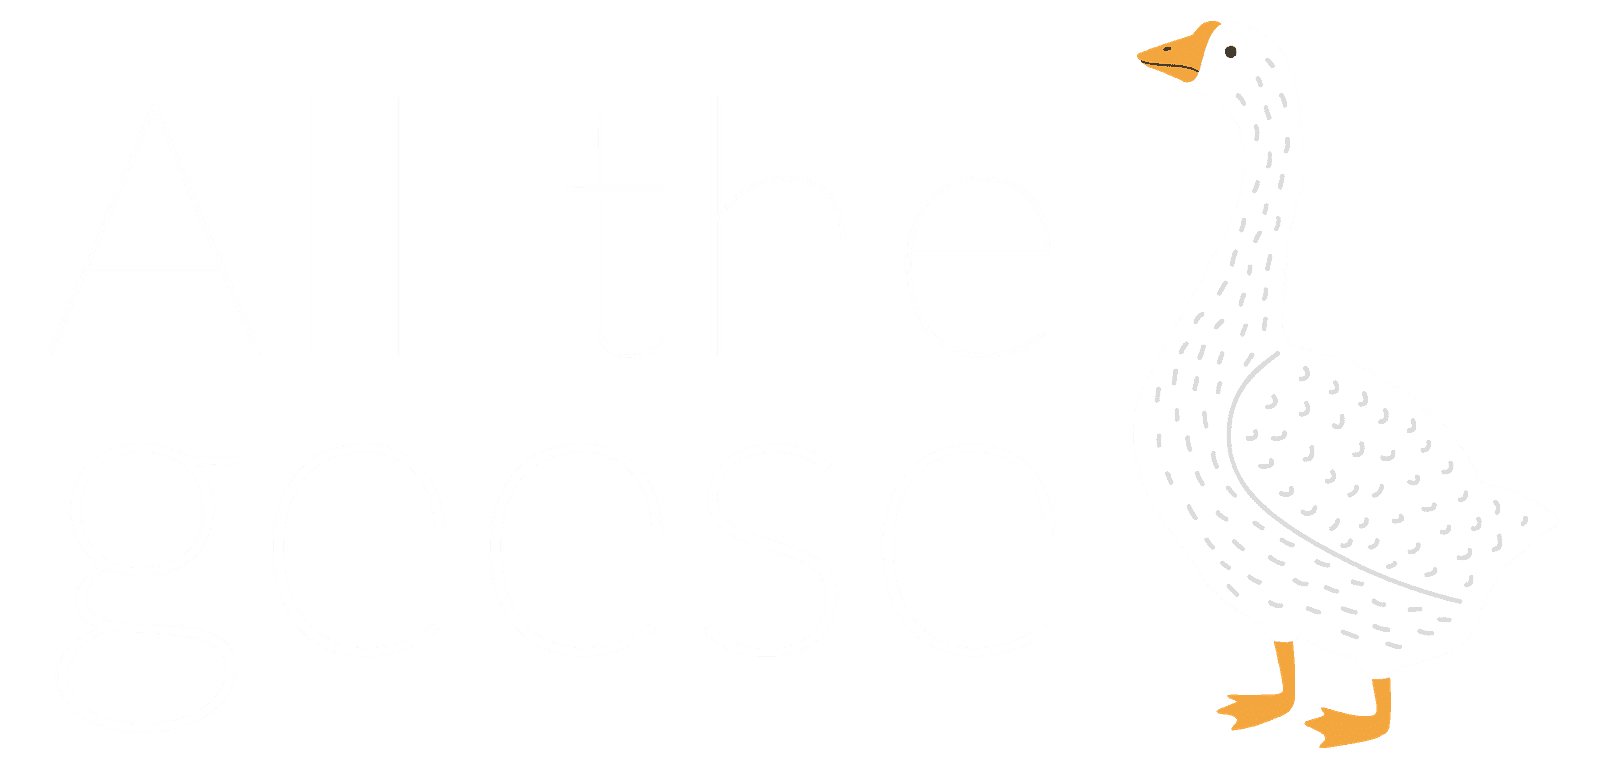 All the geese logo